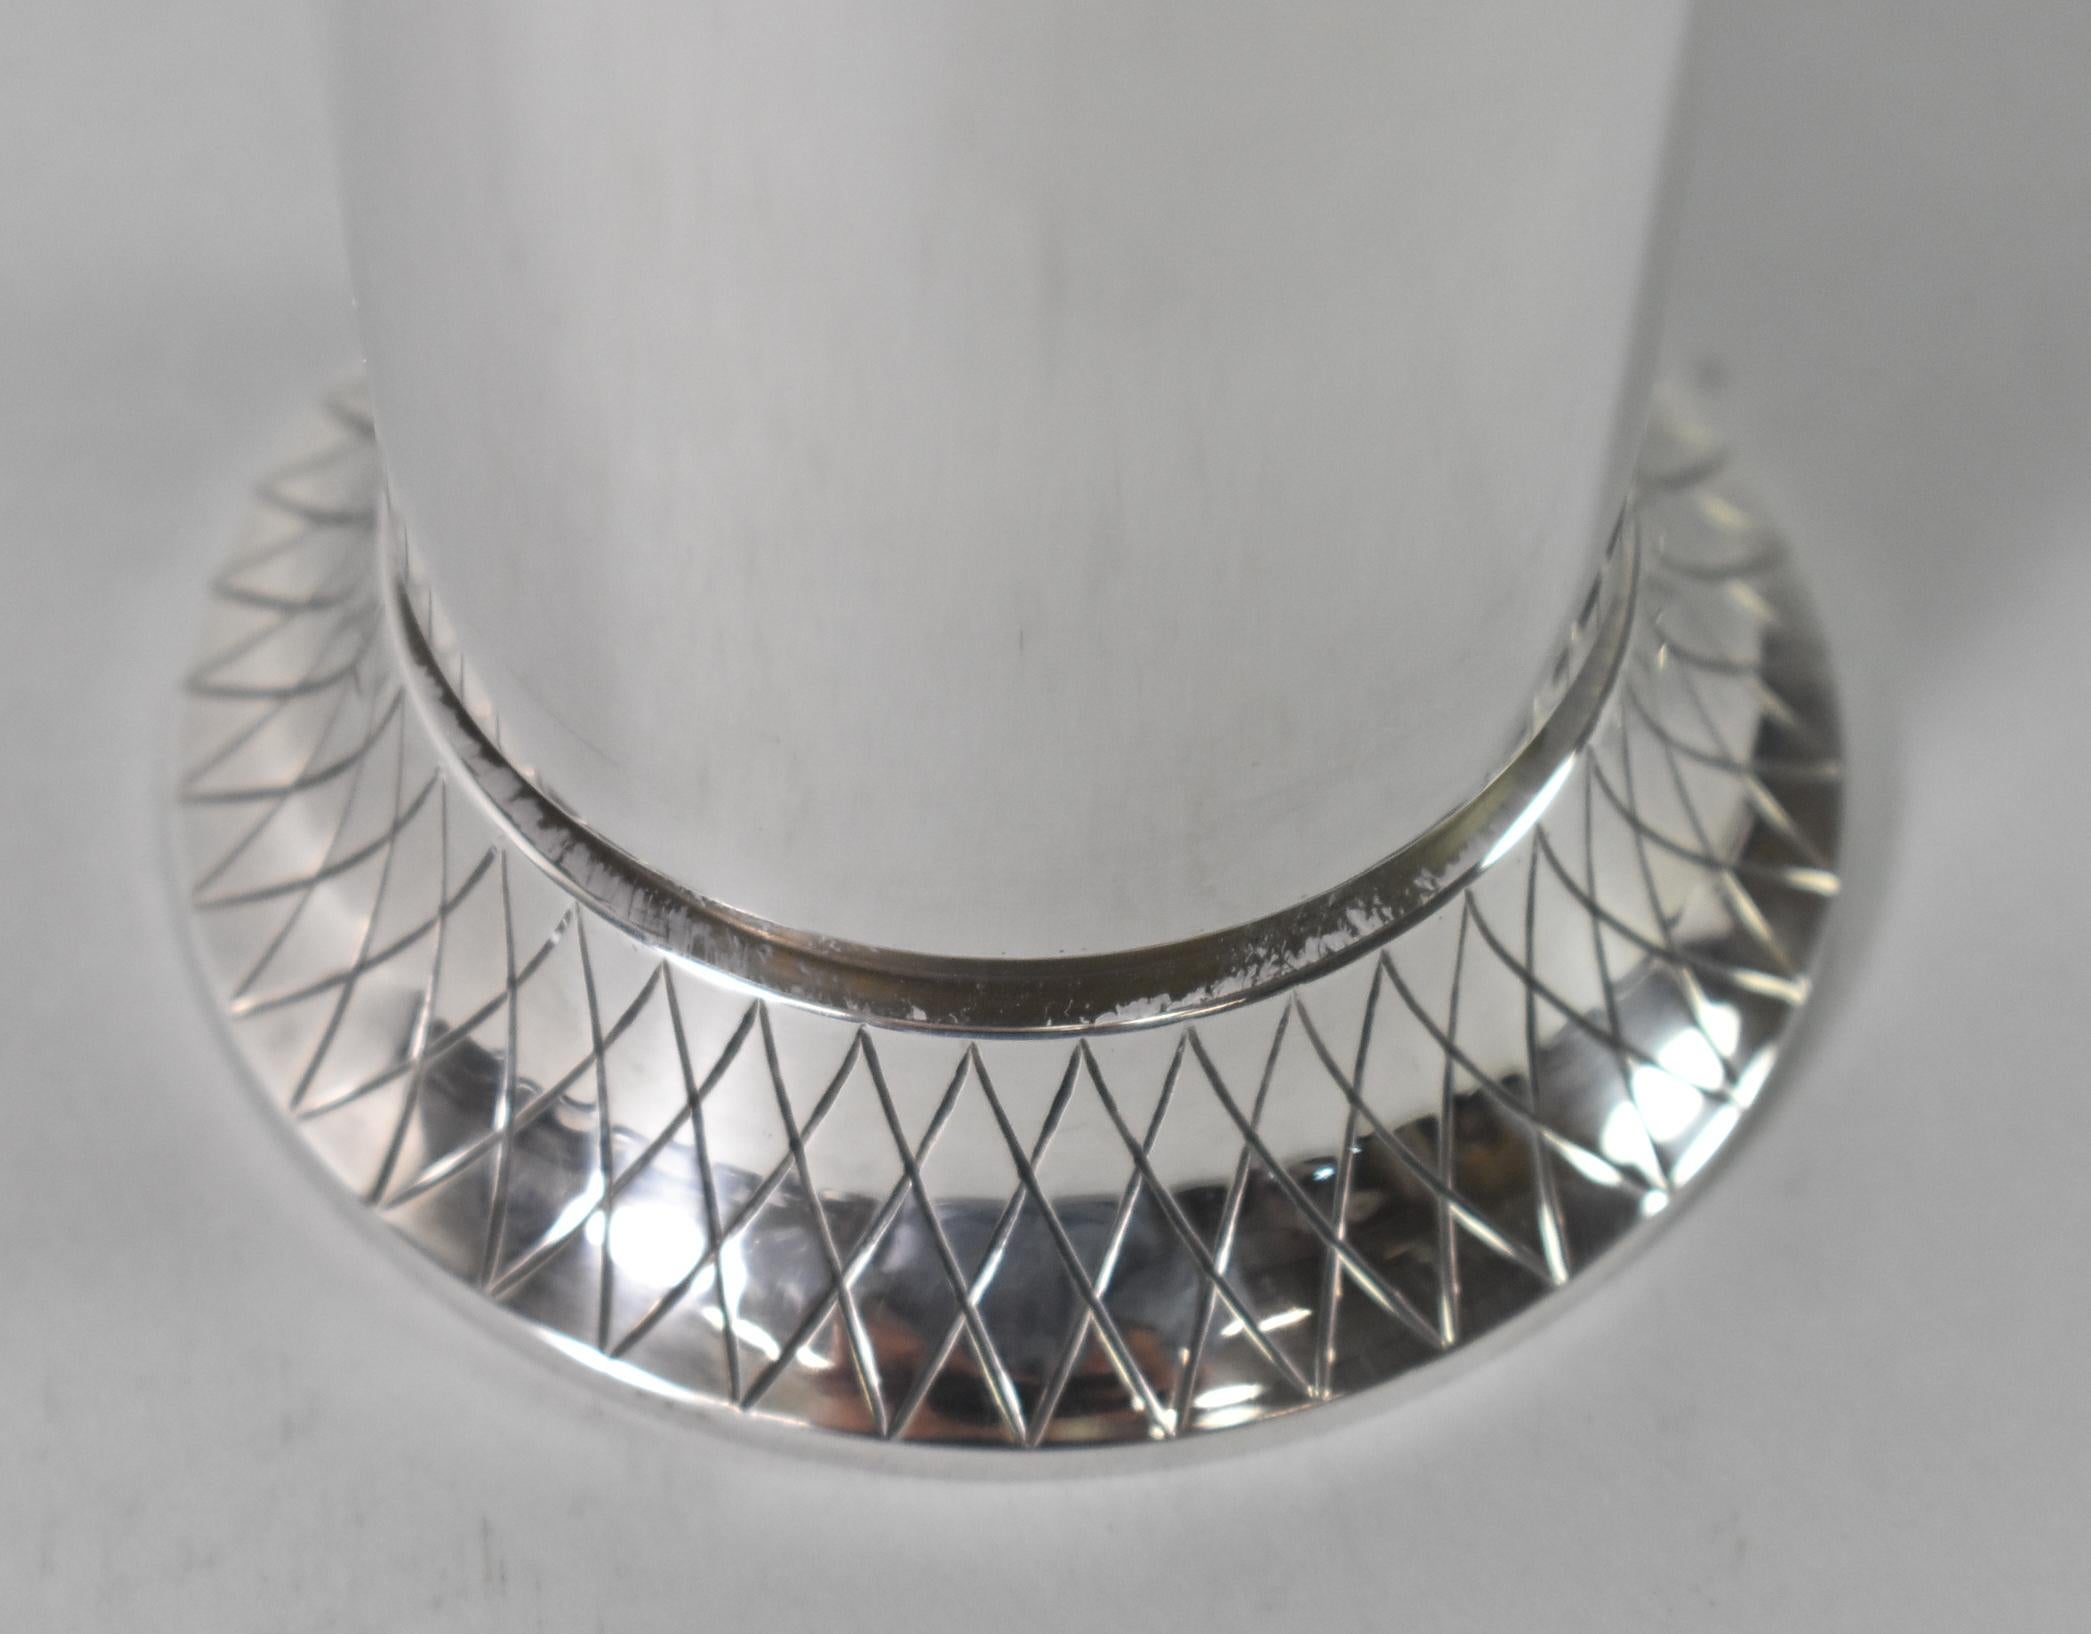 Georg Jensen Sterling Silver Vase No. 819C by Sigvard Bernadotte In Good Condition For Sale In Toledo, OH